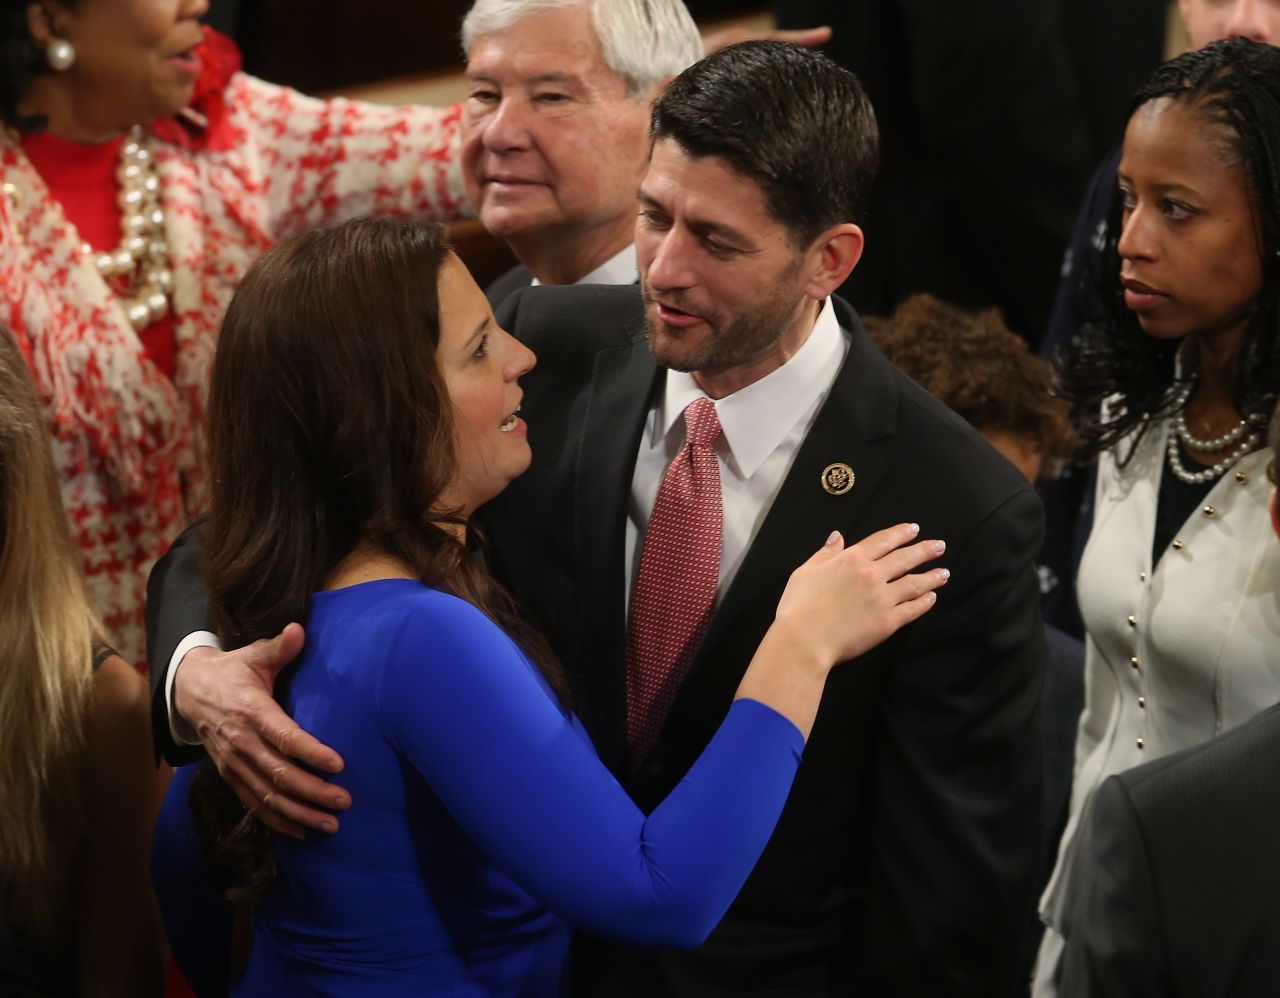 Stefanik gets a hug from US Rep. Paul Ryan before the start of the first session of Congress in January 2015. Stefanik helped Ryan prepare for his vice presidential debate in 2012.